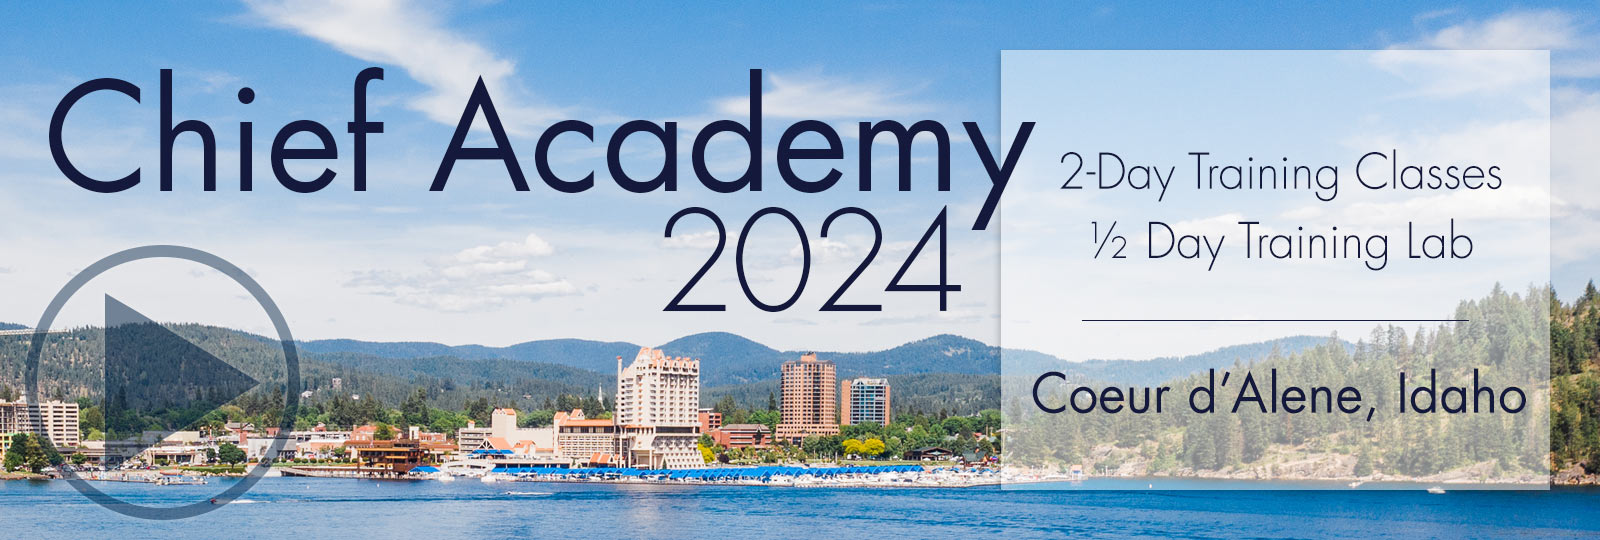 Chief Academy 2024 will consist of two days of classroom training and a half-day training lab in Coeur d'Alene, Idaho.